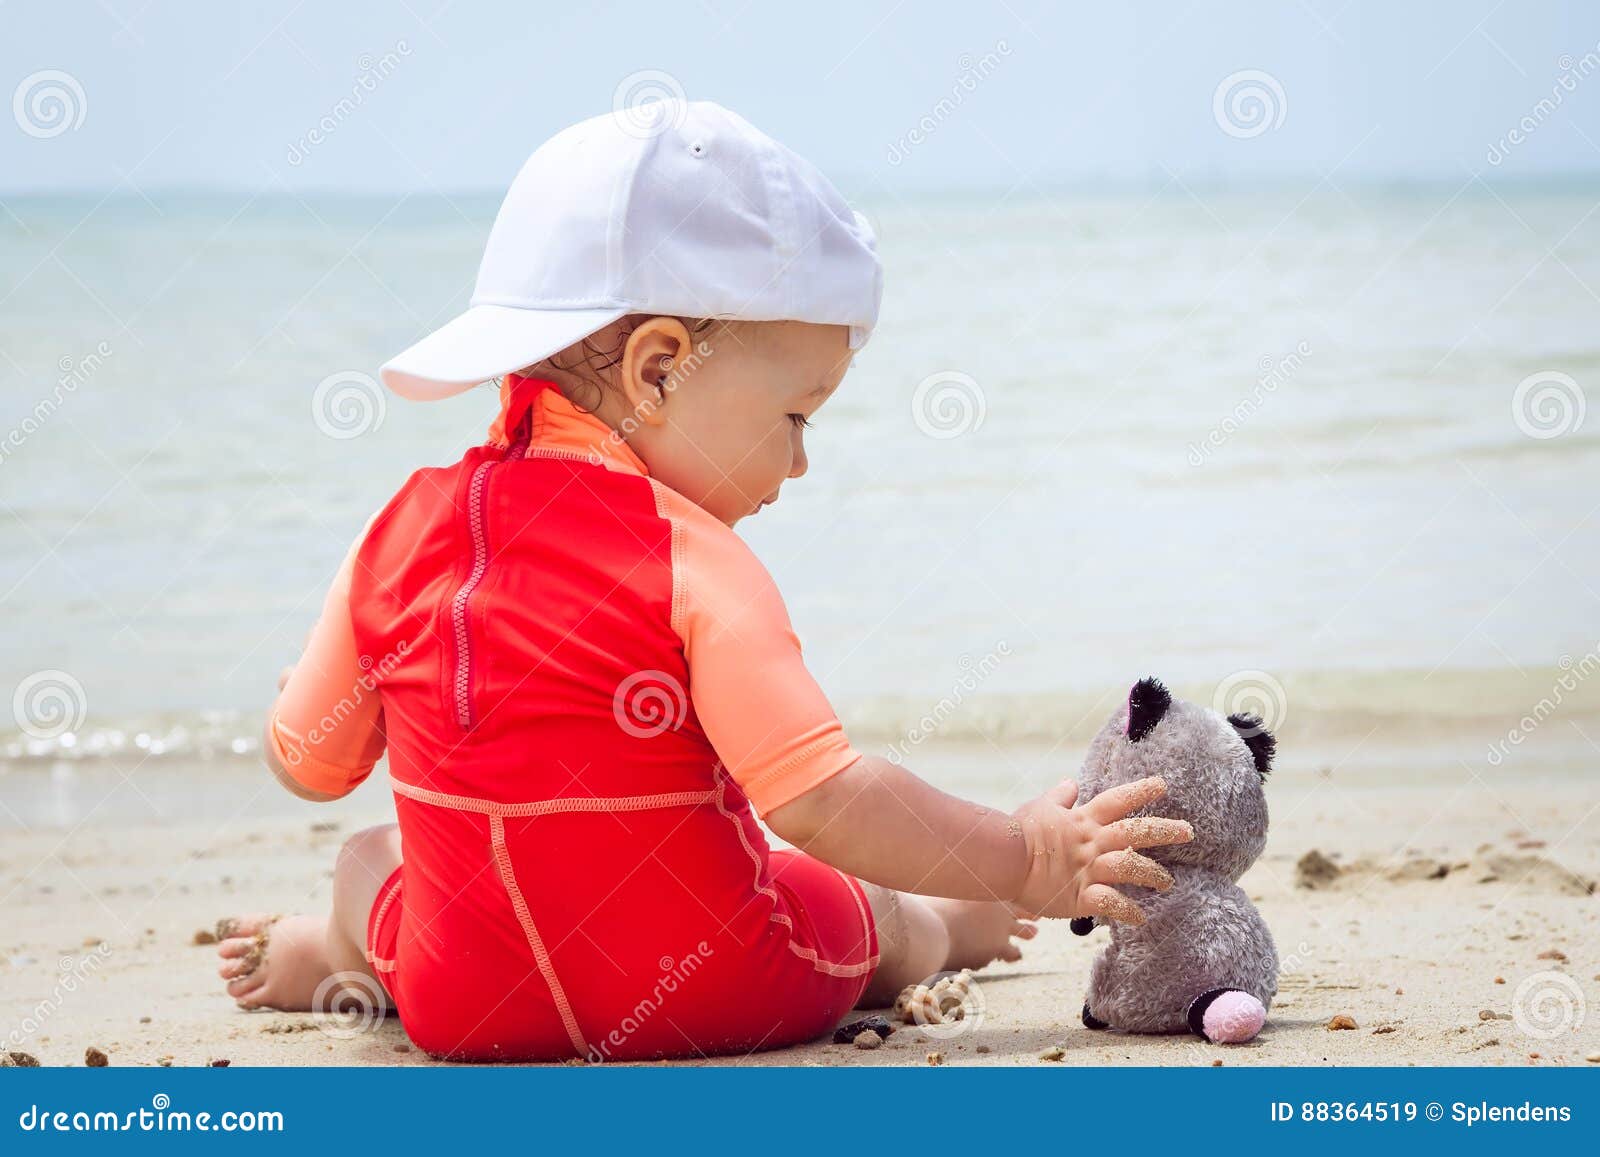 Child playing with toy on beach with sea on background. Concept for friendship and happy childhood